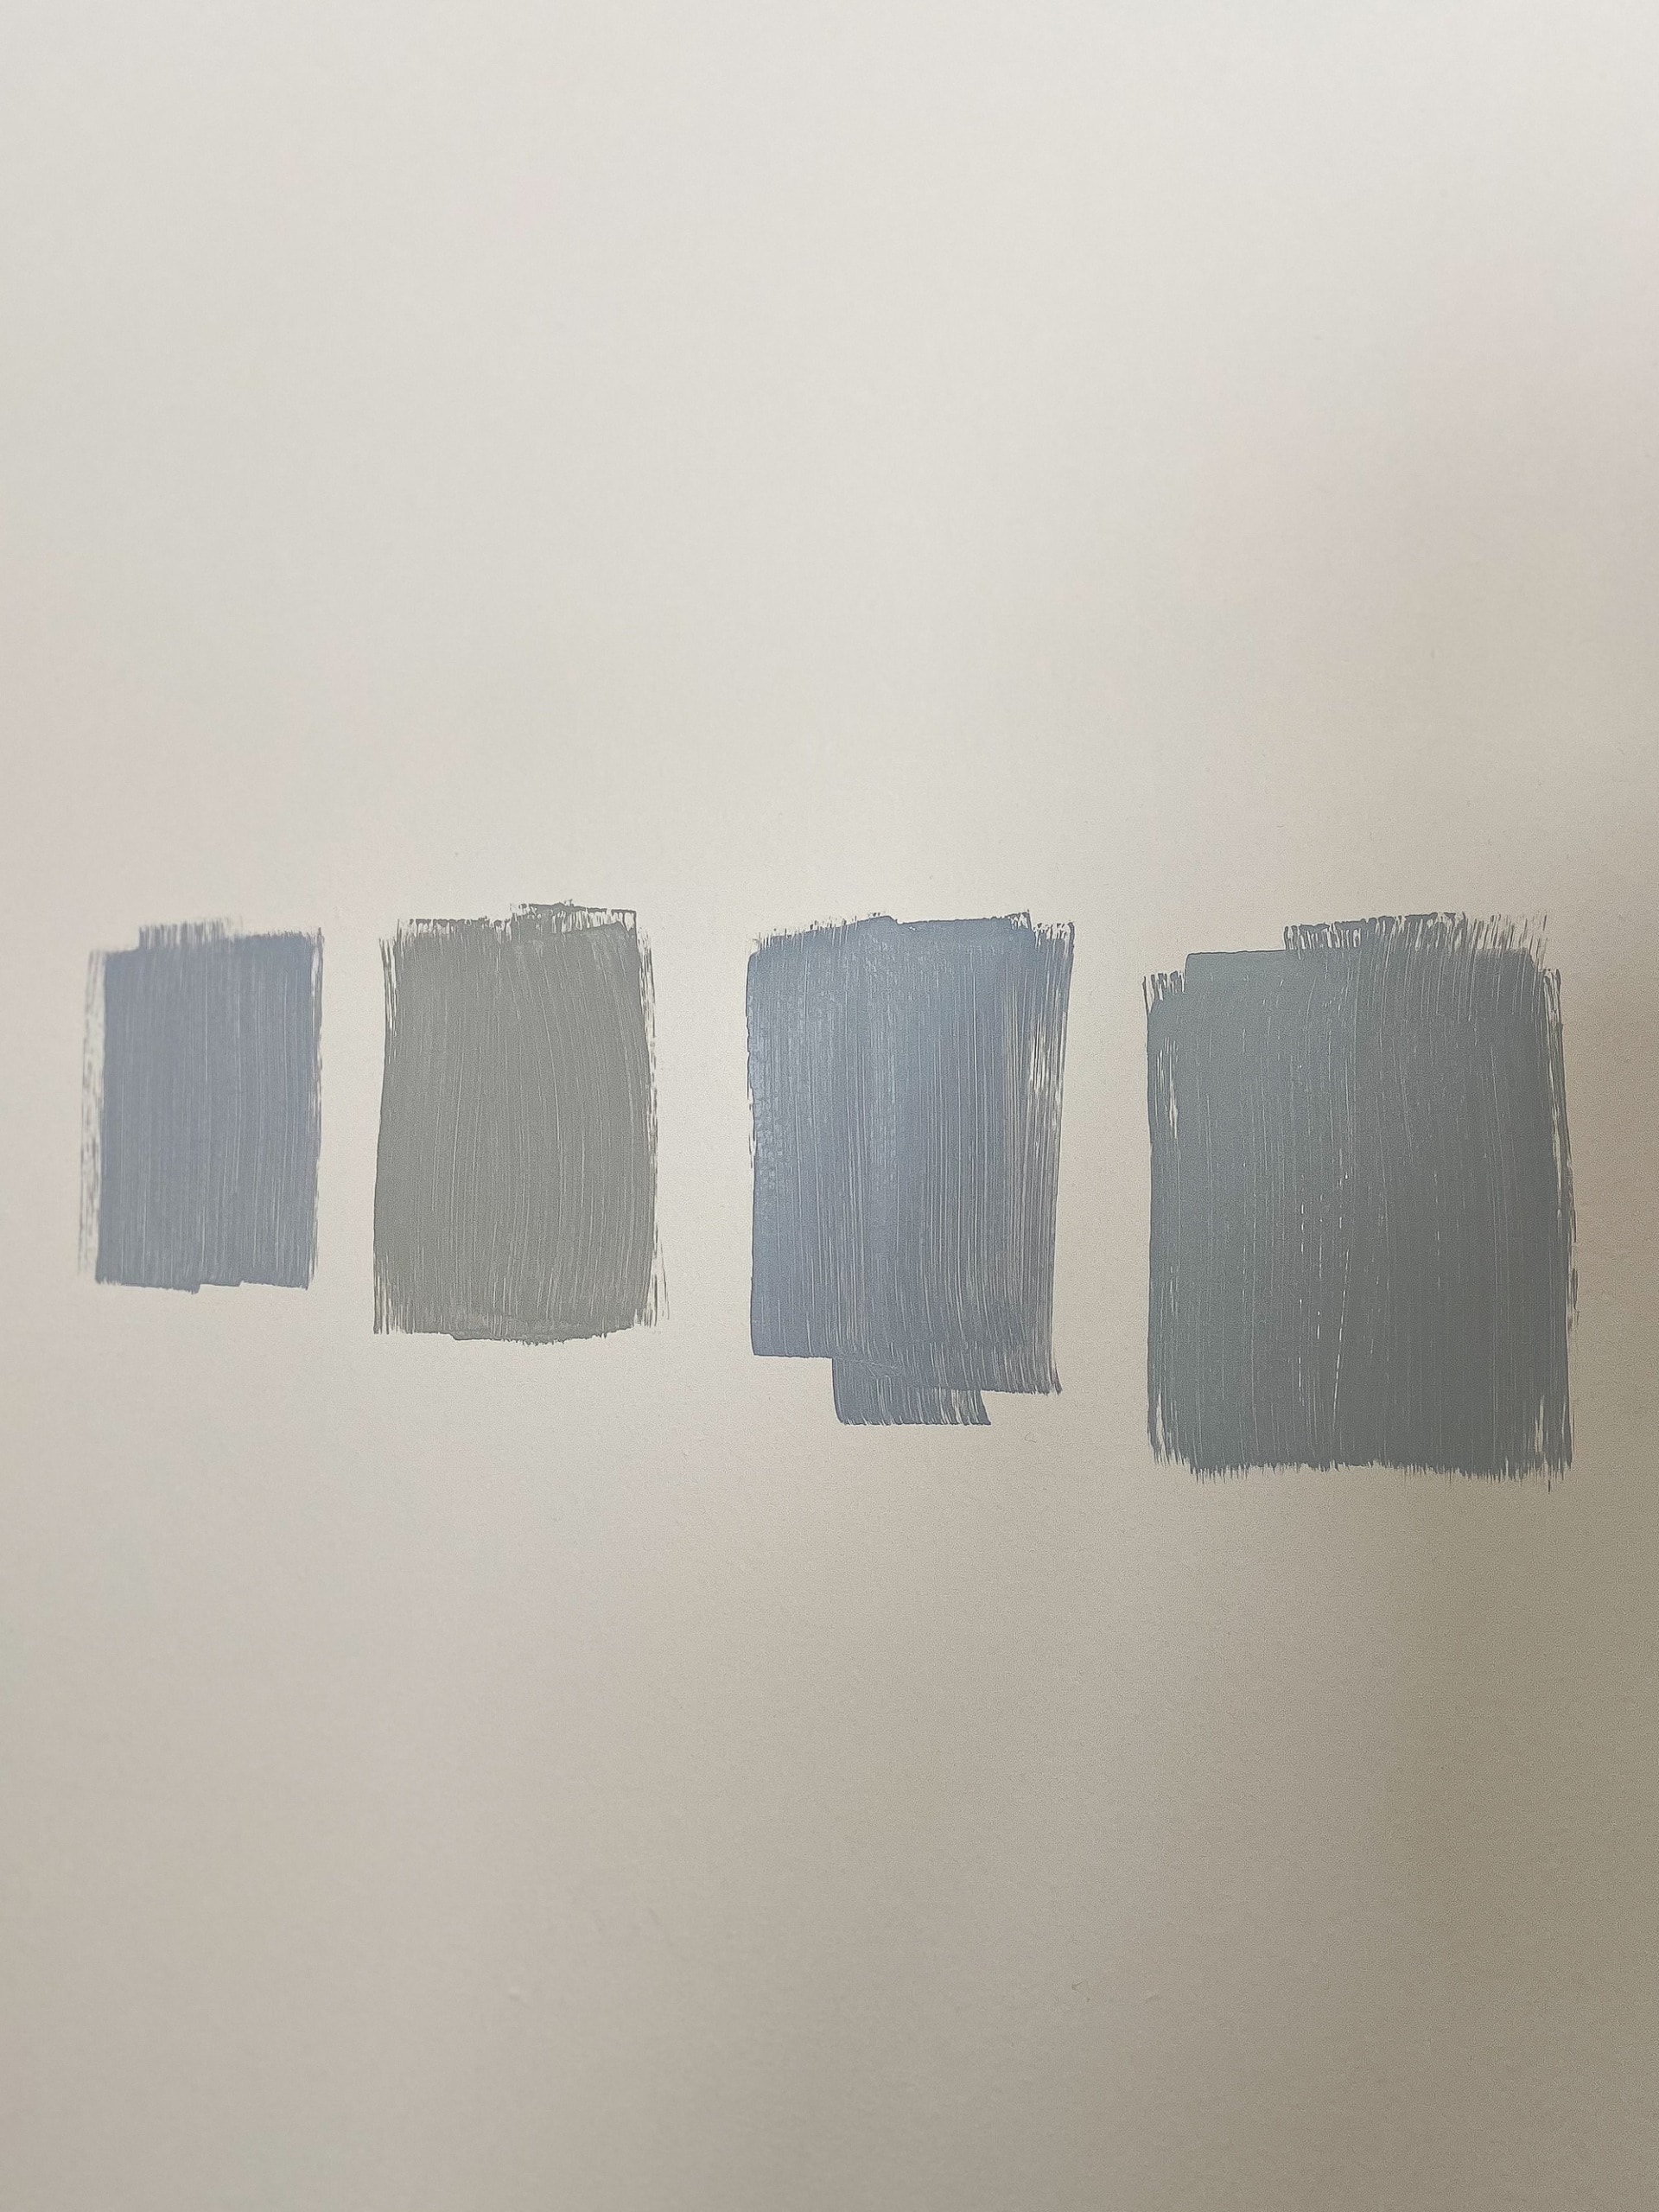 paint samples on the wall